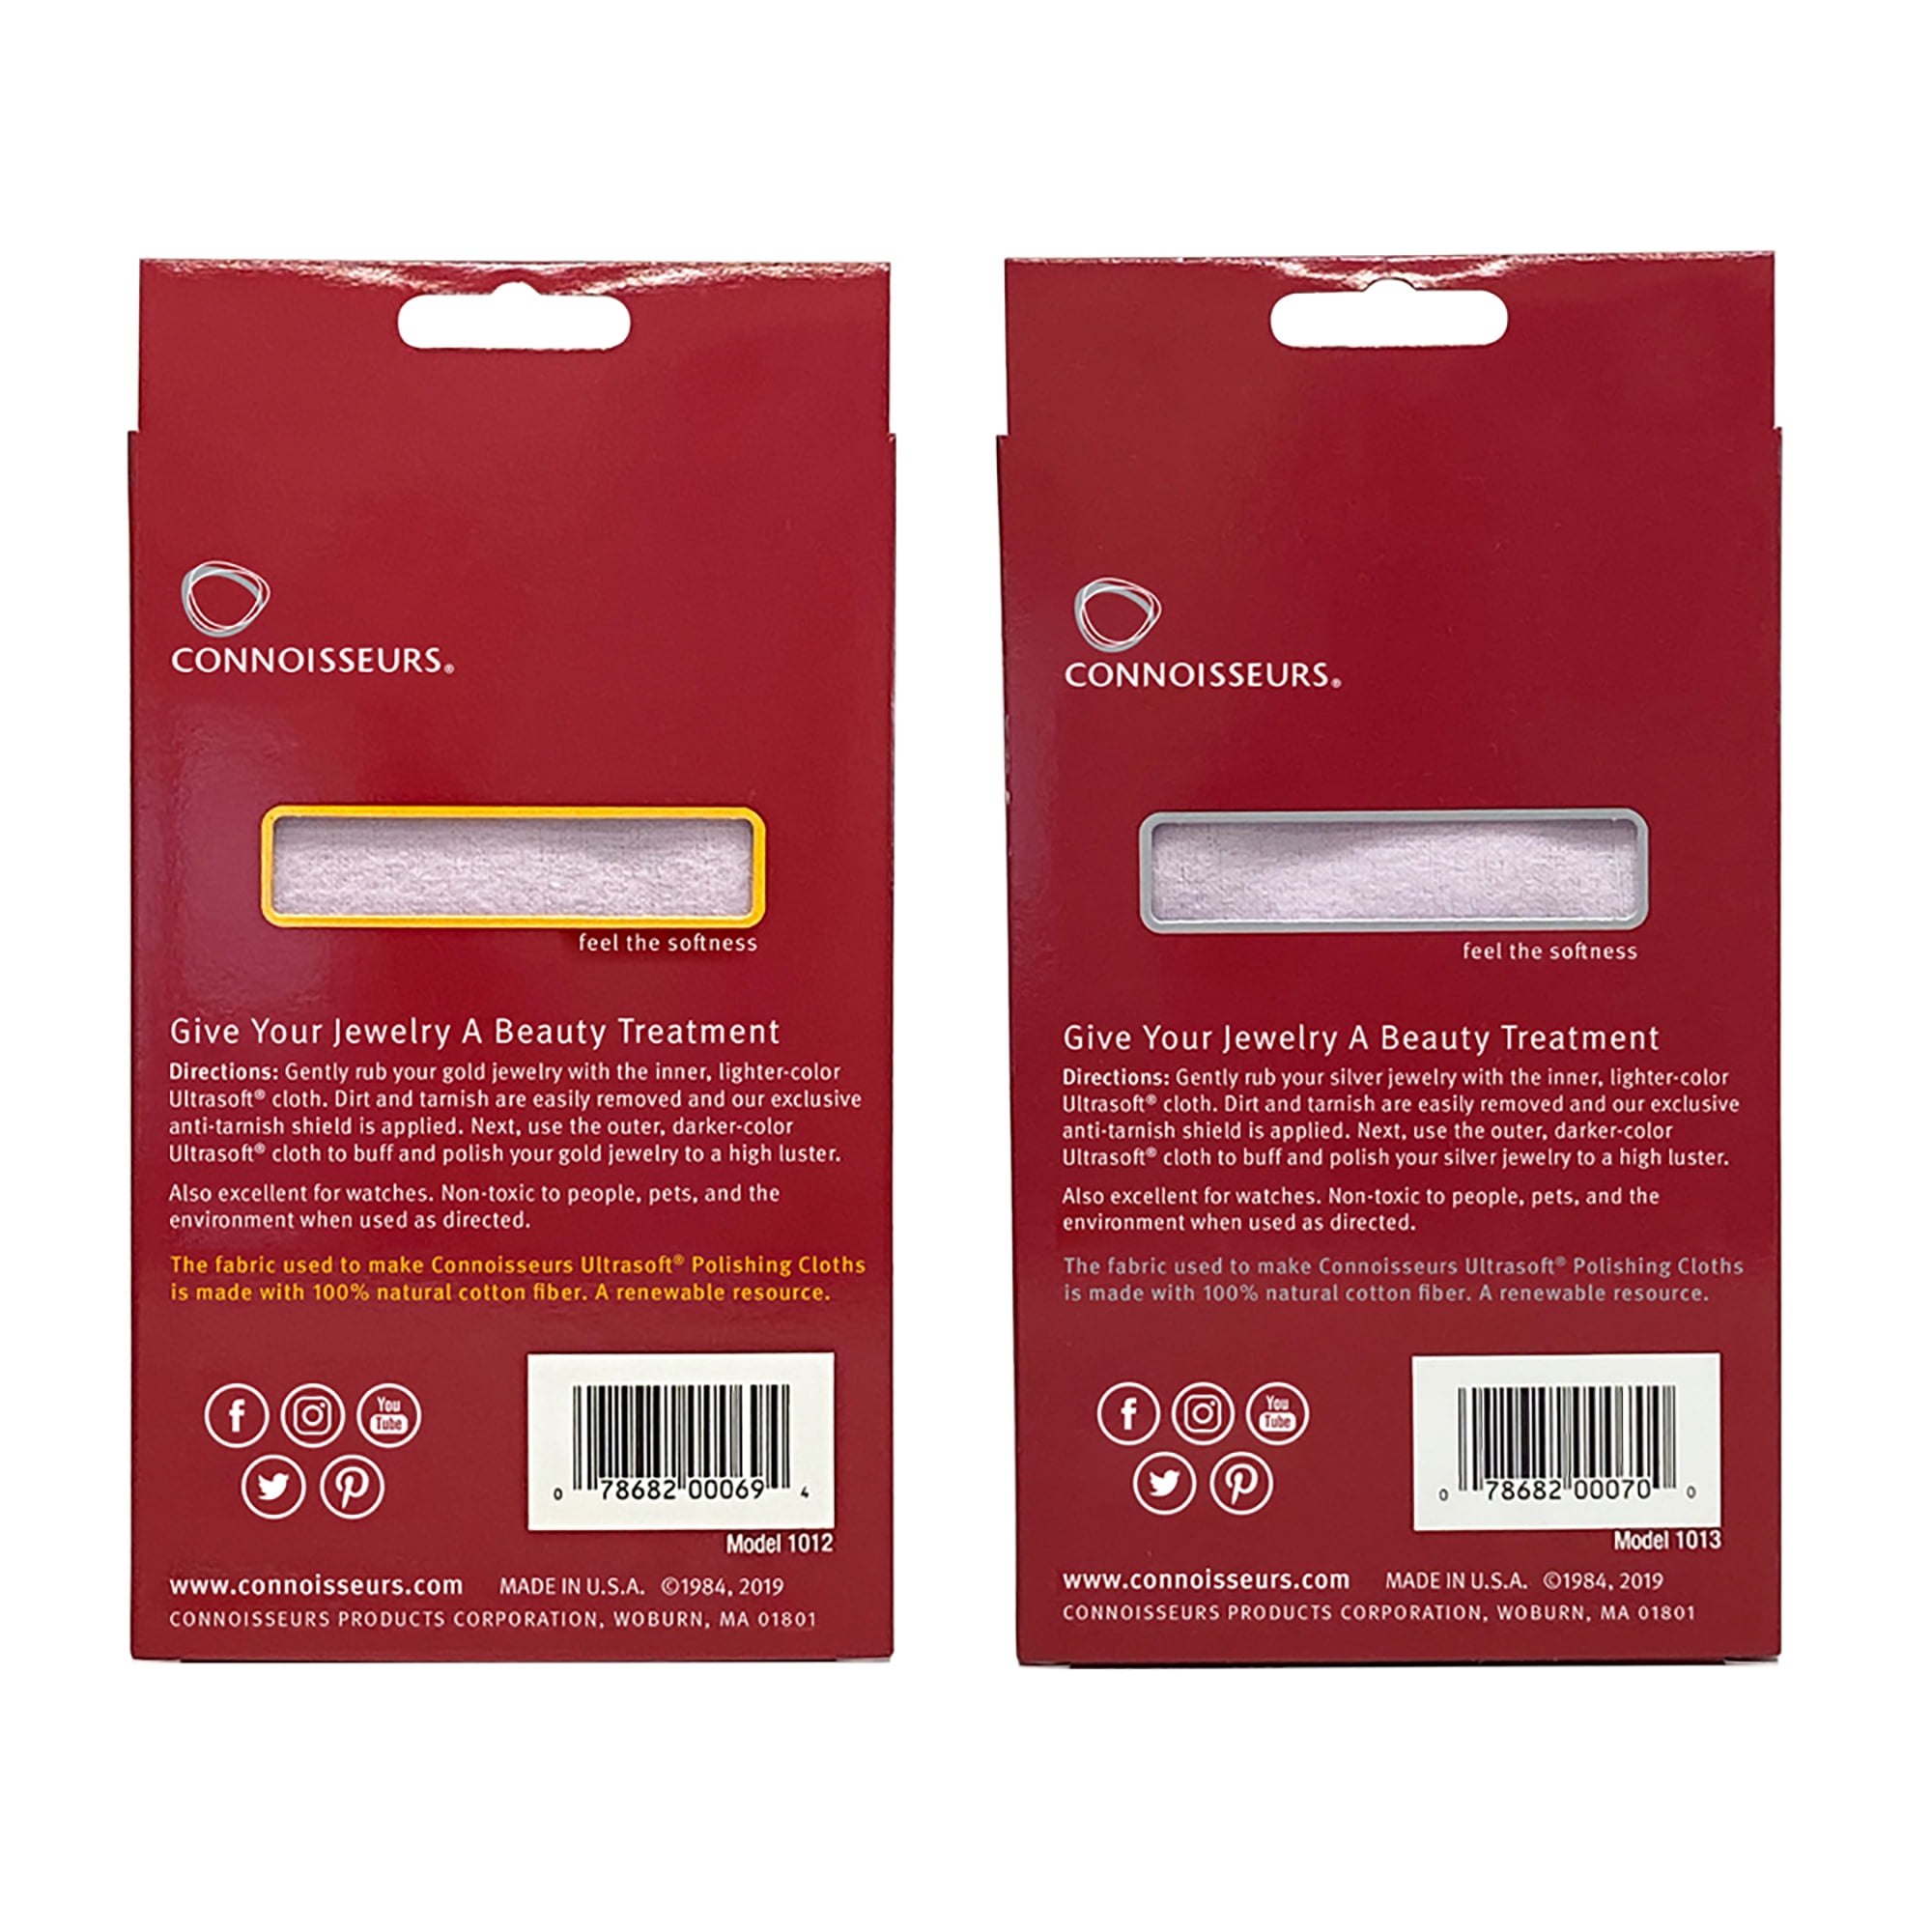 Connoisseurs 1013 Silver Ultrasoft Jewelry Polishing Cloth for sale online